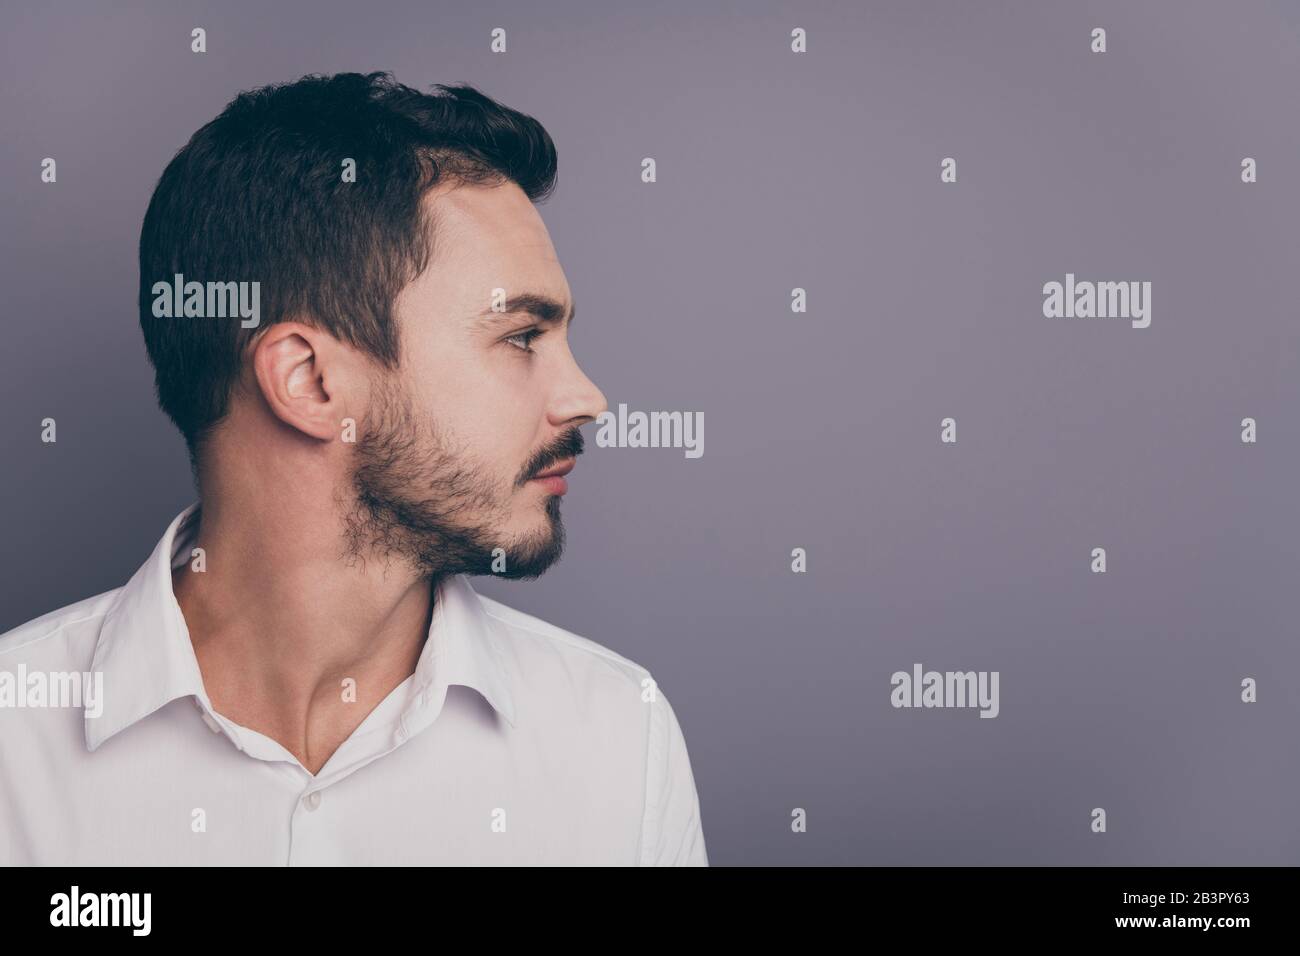 Closeup profile photo of young handsome serious business man look side empty space showing perfect ideal neat groomed beard wear white office shirt Stock Photo